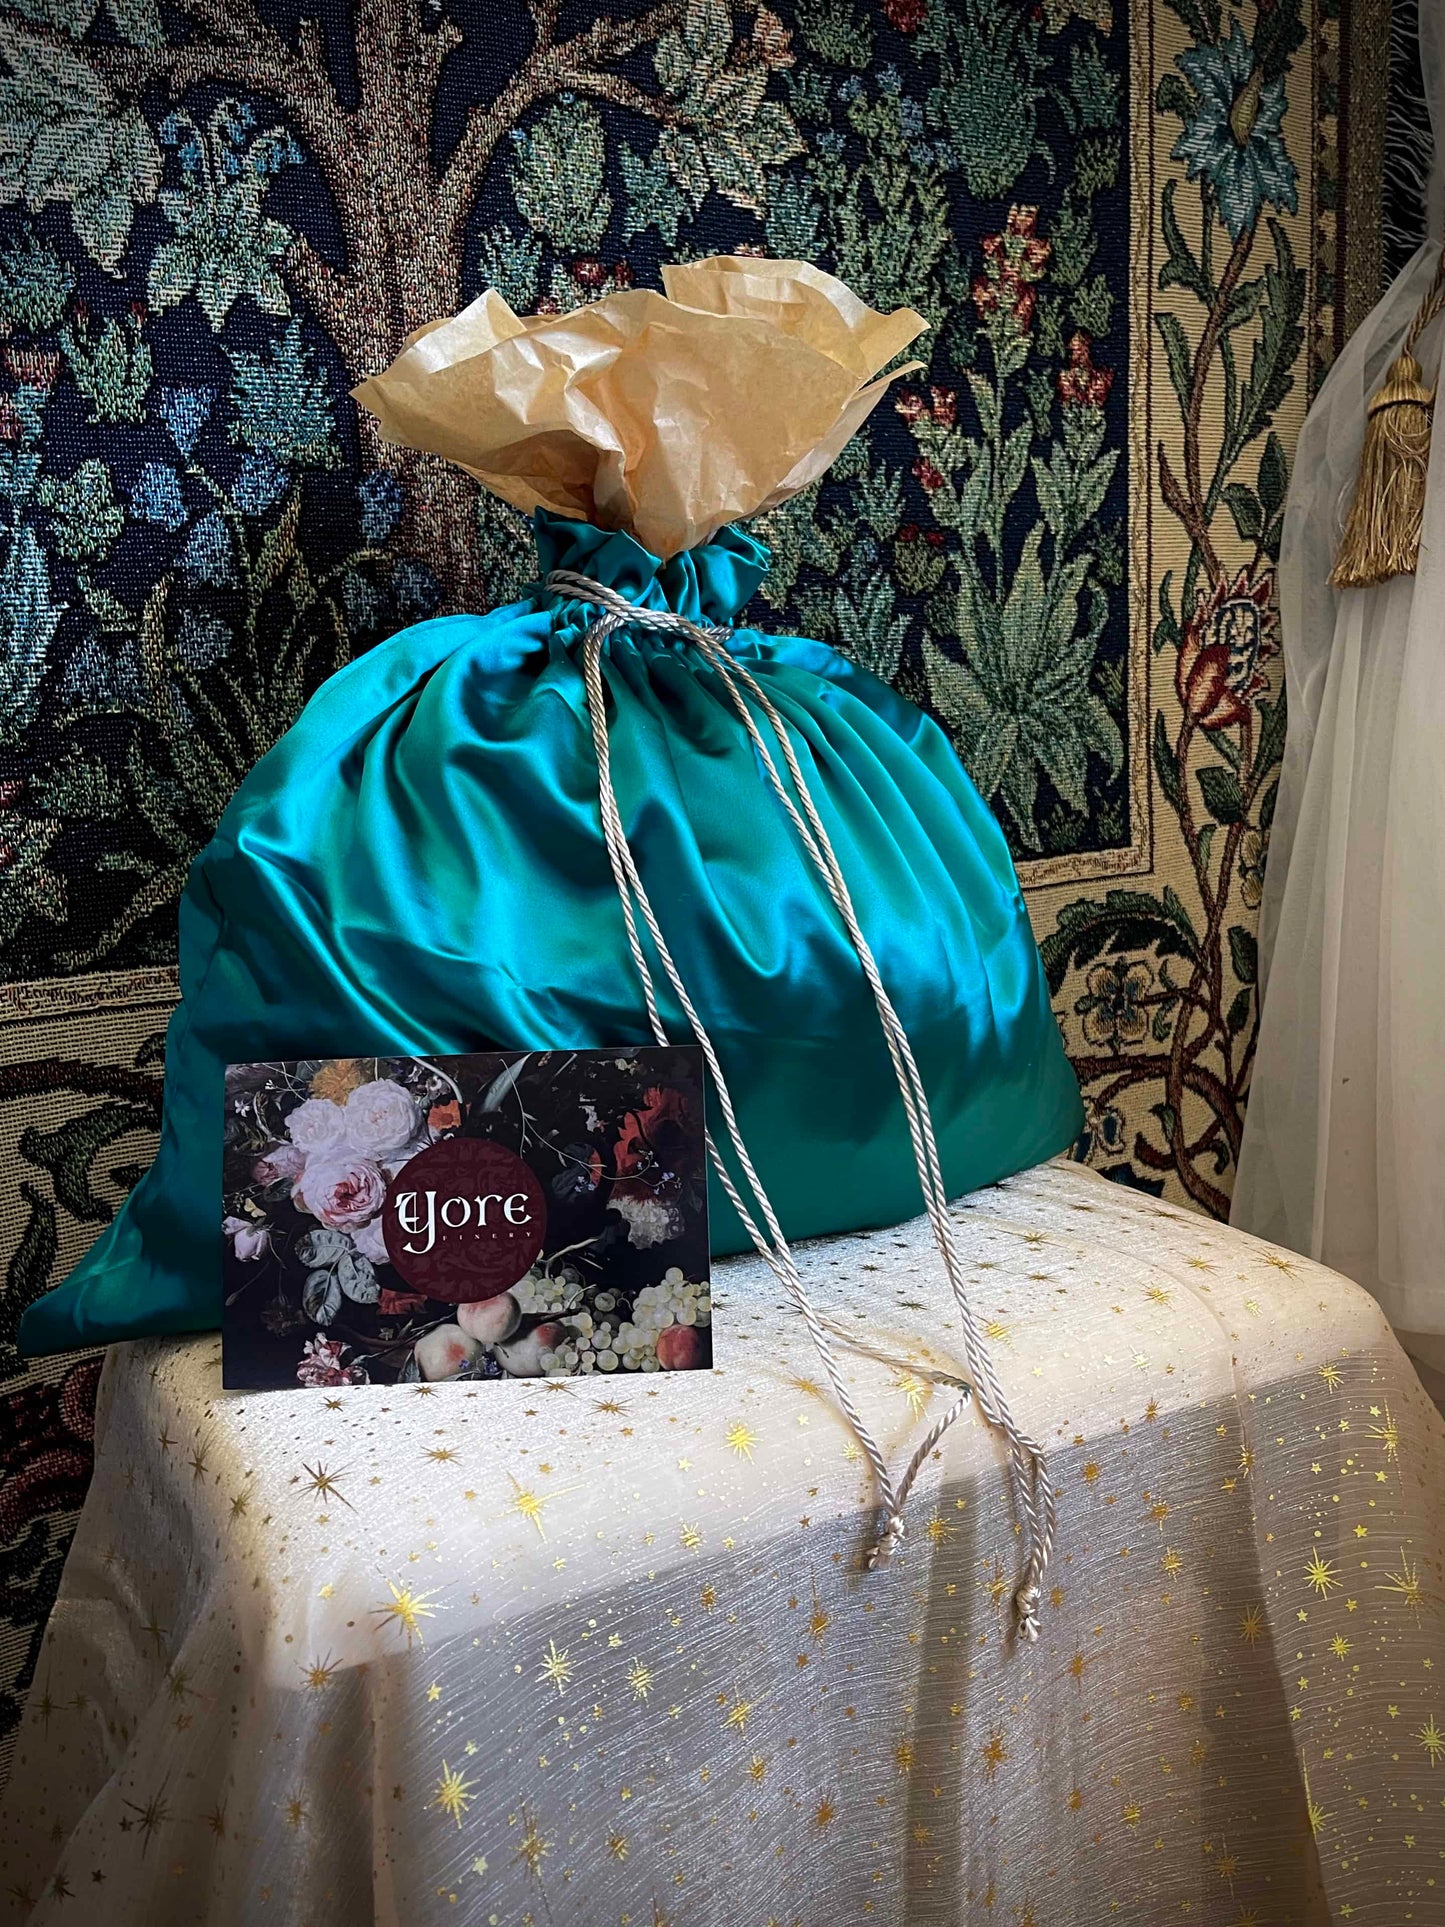 A historical fashion style bundle mystery bag in a satin drawstring bag sits on a celestial puff in front of a historically inspired tapestry.